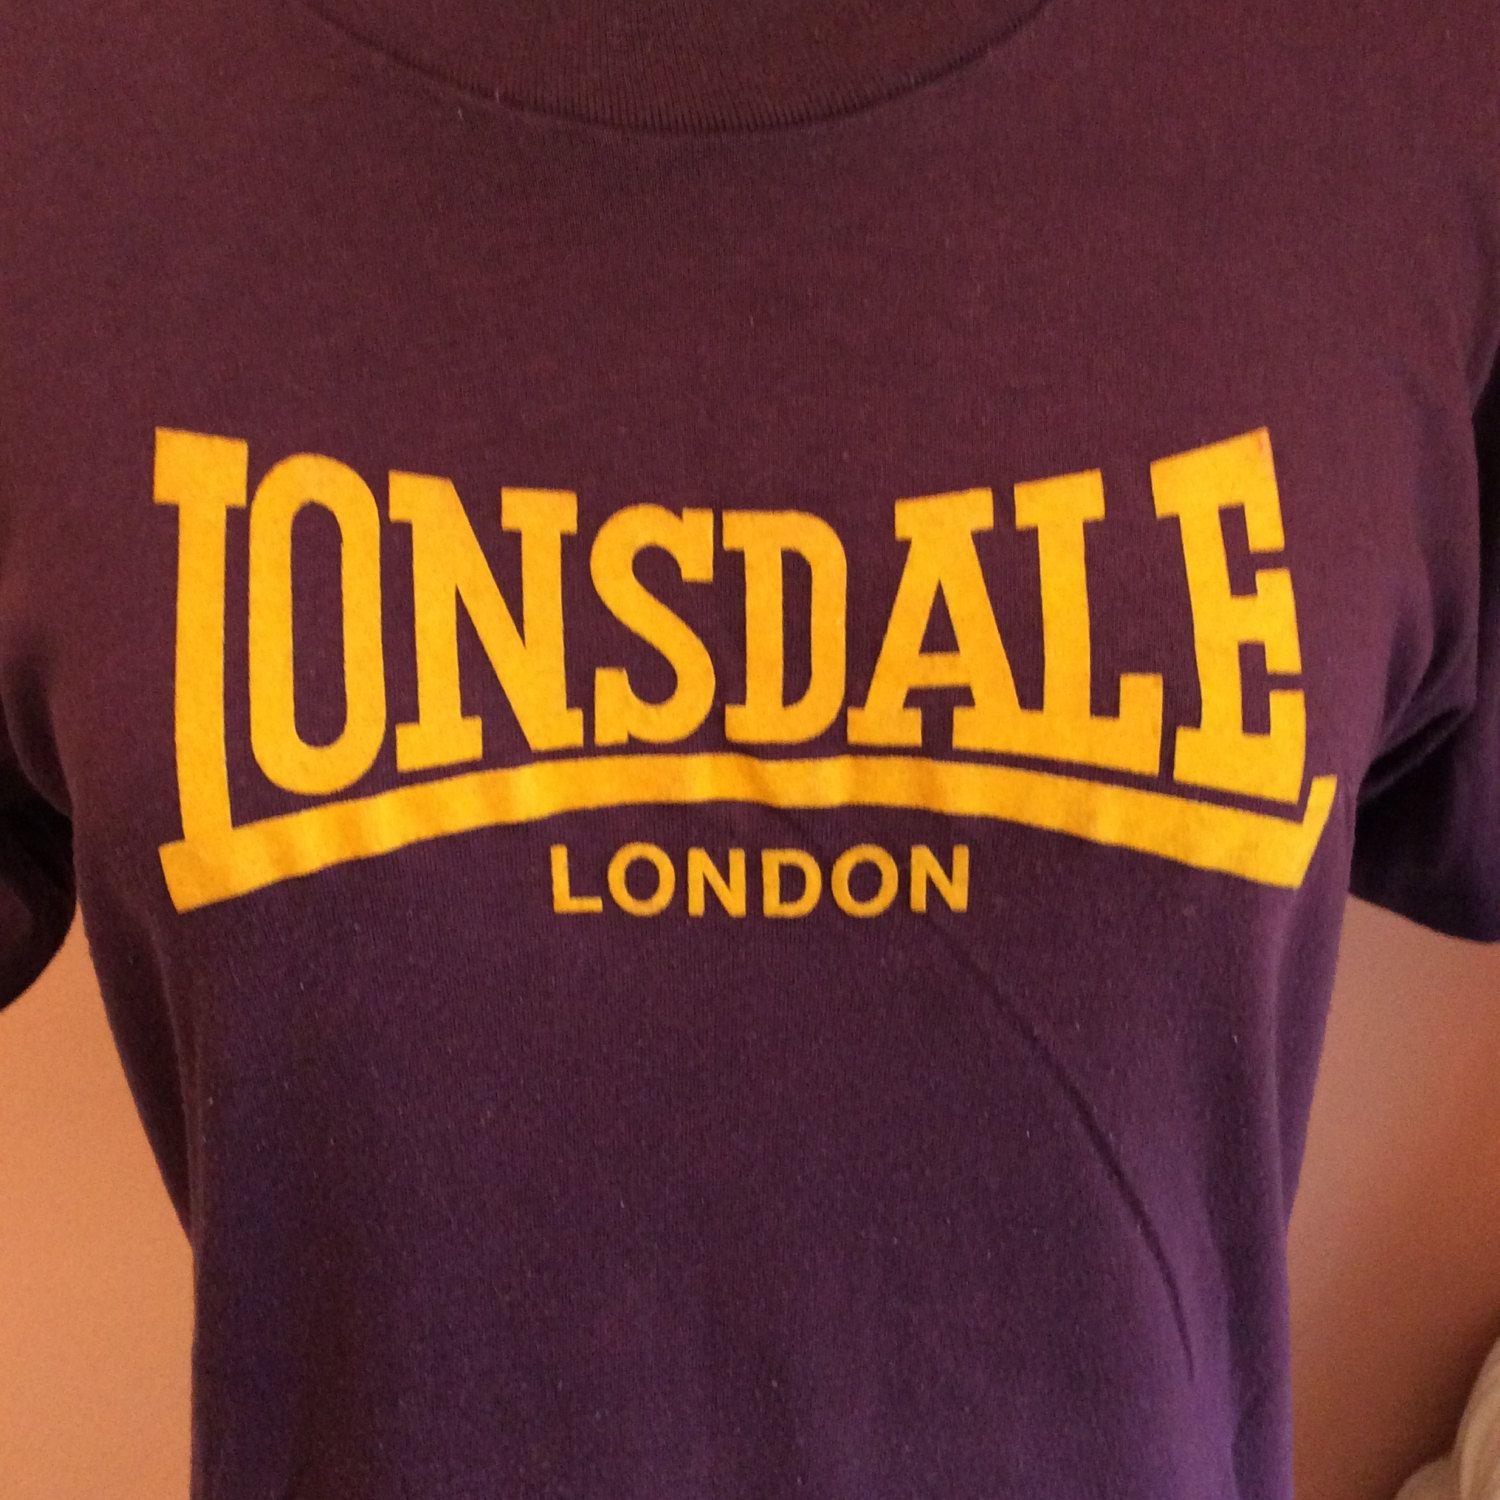 80s Clothing and Apparel Logo - Vintage 80s, Tshirt, Lonsdale London, Boxing, Sports Apparel (B129 ...